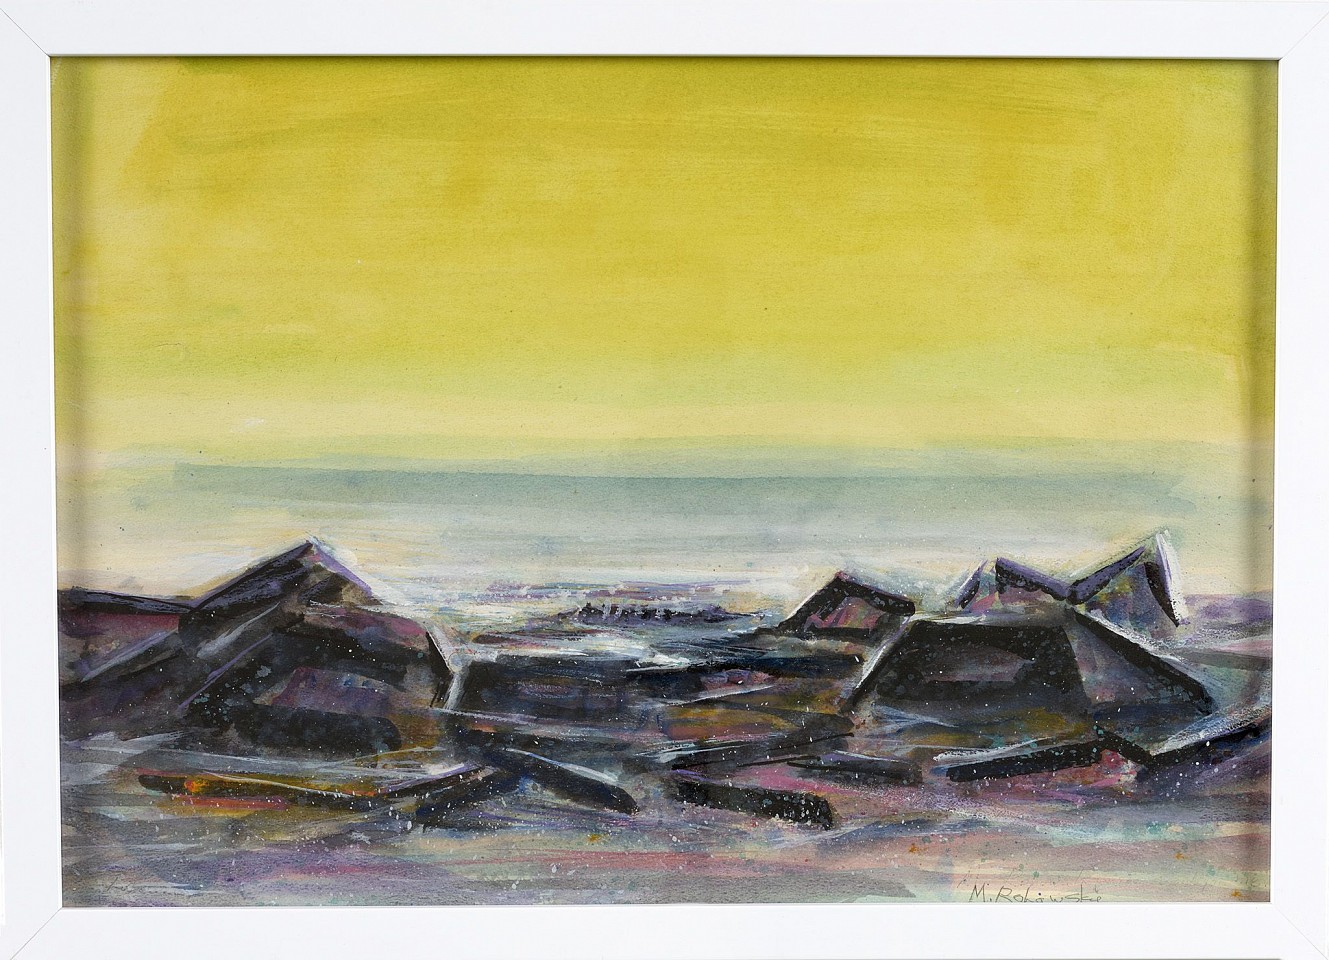 Meyers Rohowsky, Monhegan, Rocky Shore, c. 1960
Watercolor on paper, 13 1/4 x 19 1/4 in. (33.7 x 48.9 cm)
ROH-00015